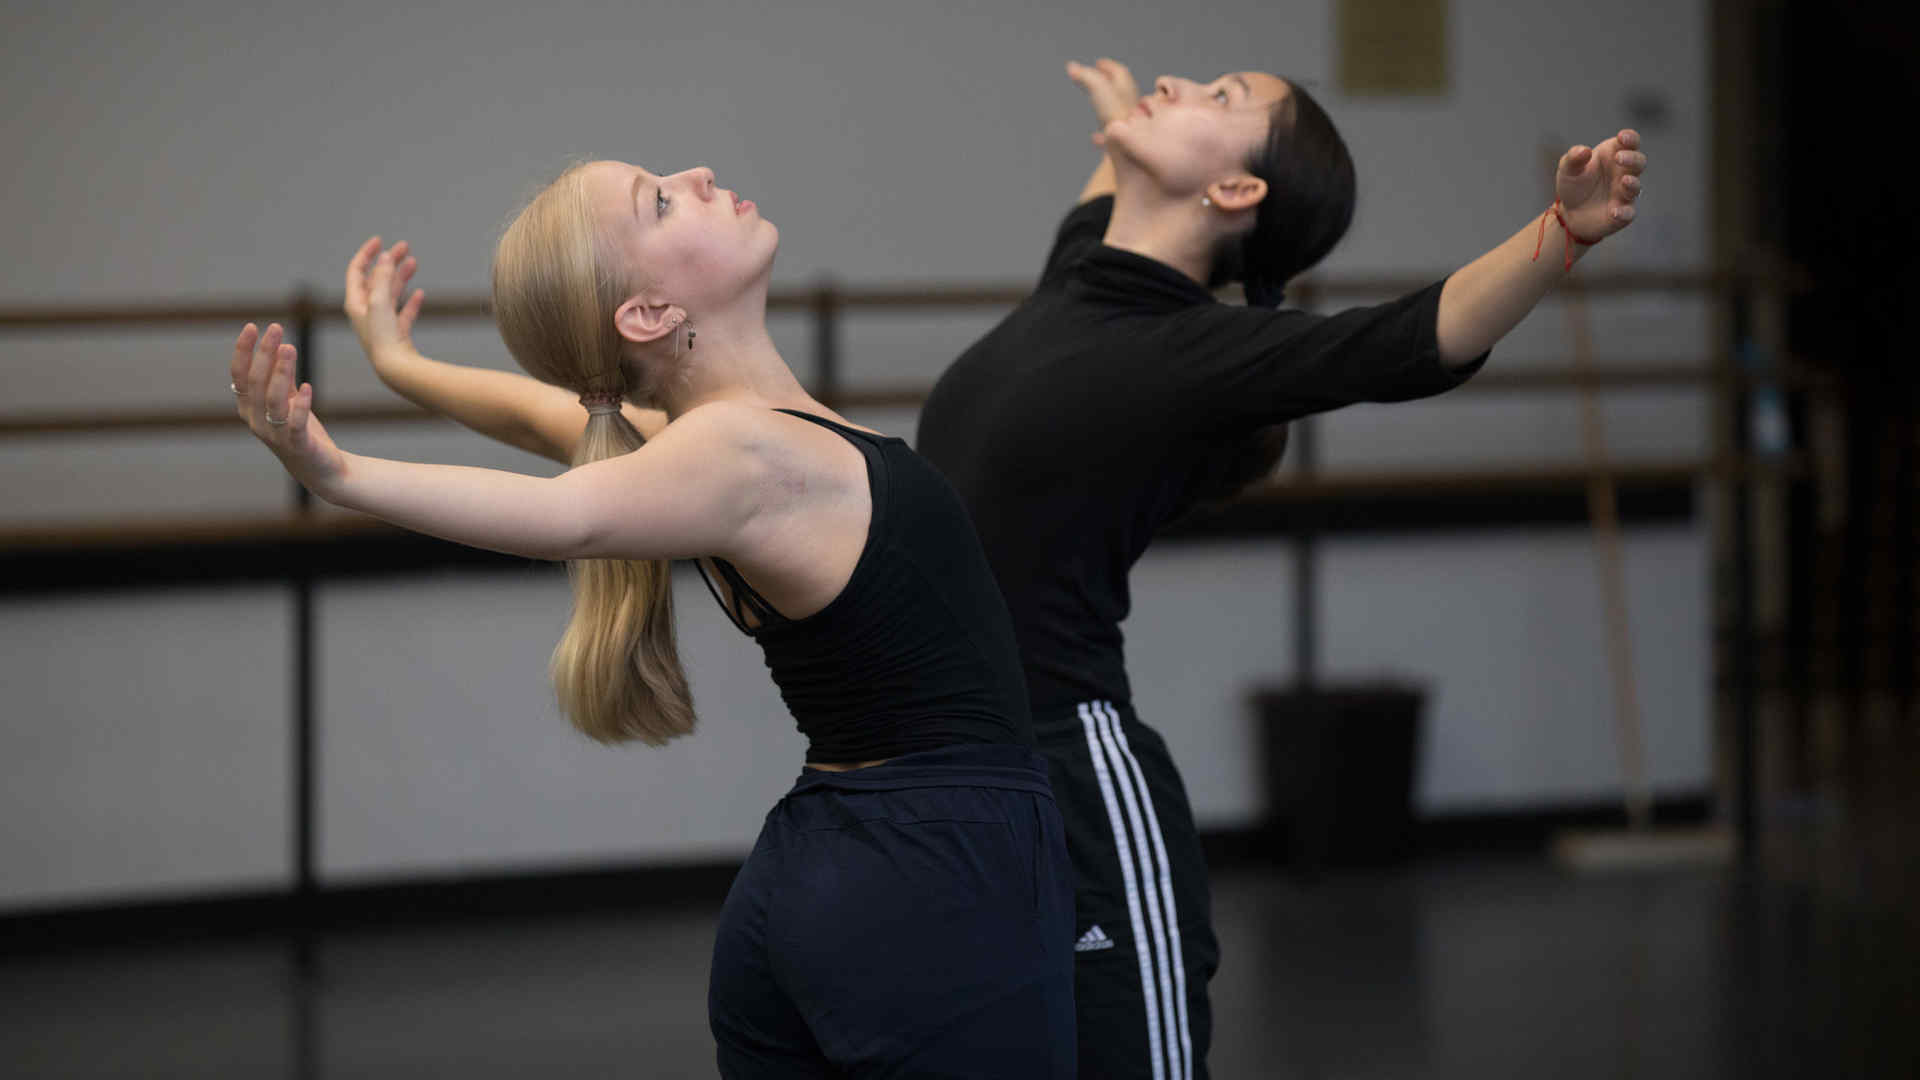 Second-year dancers Jada German and Kylie Toy dancing in a rehearsal studio